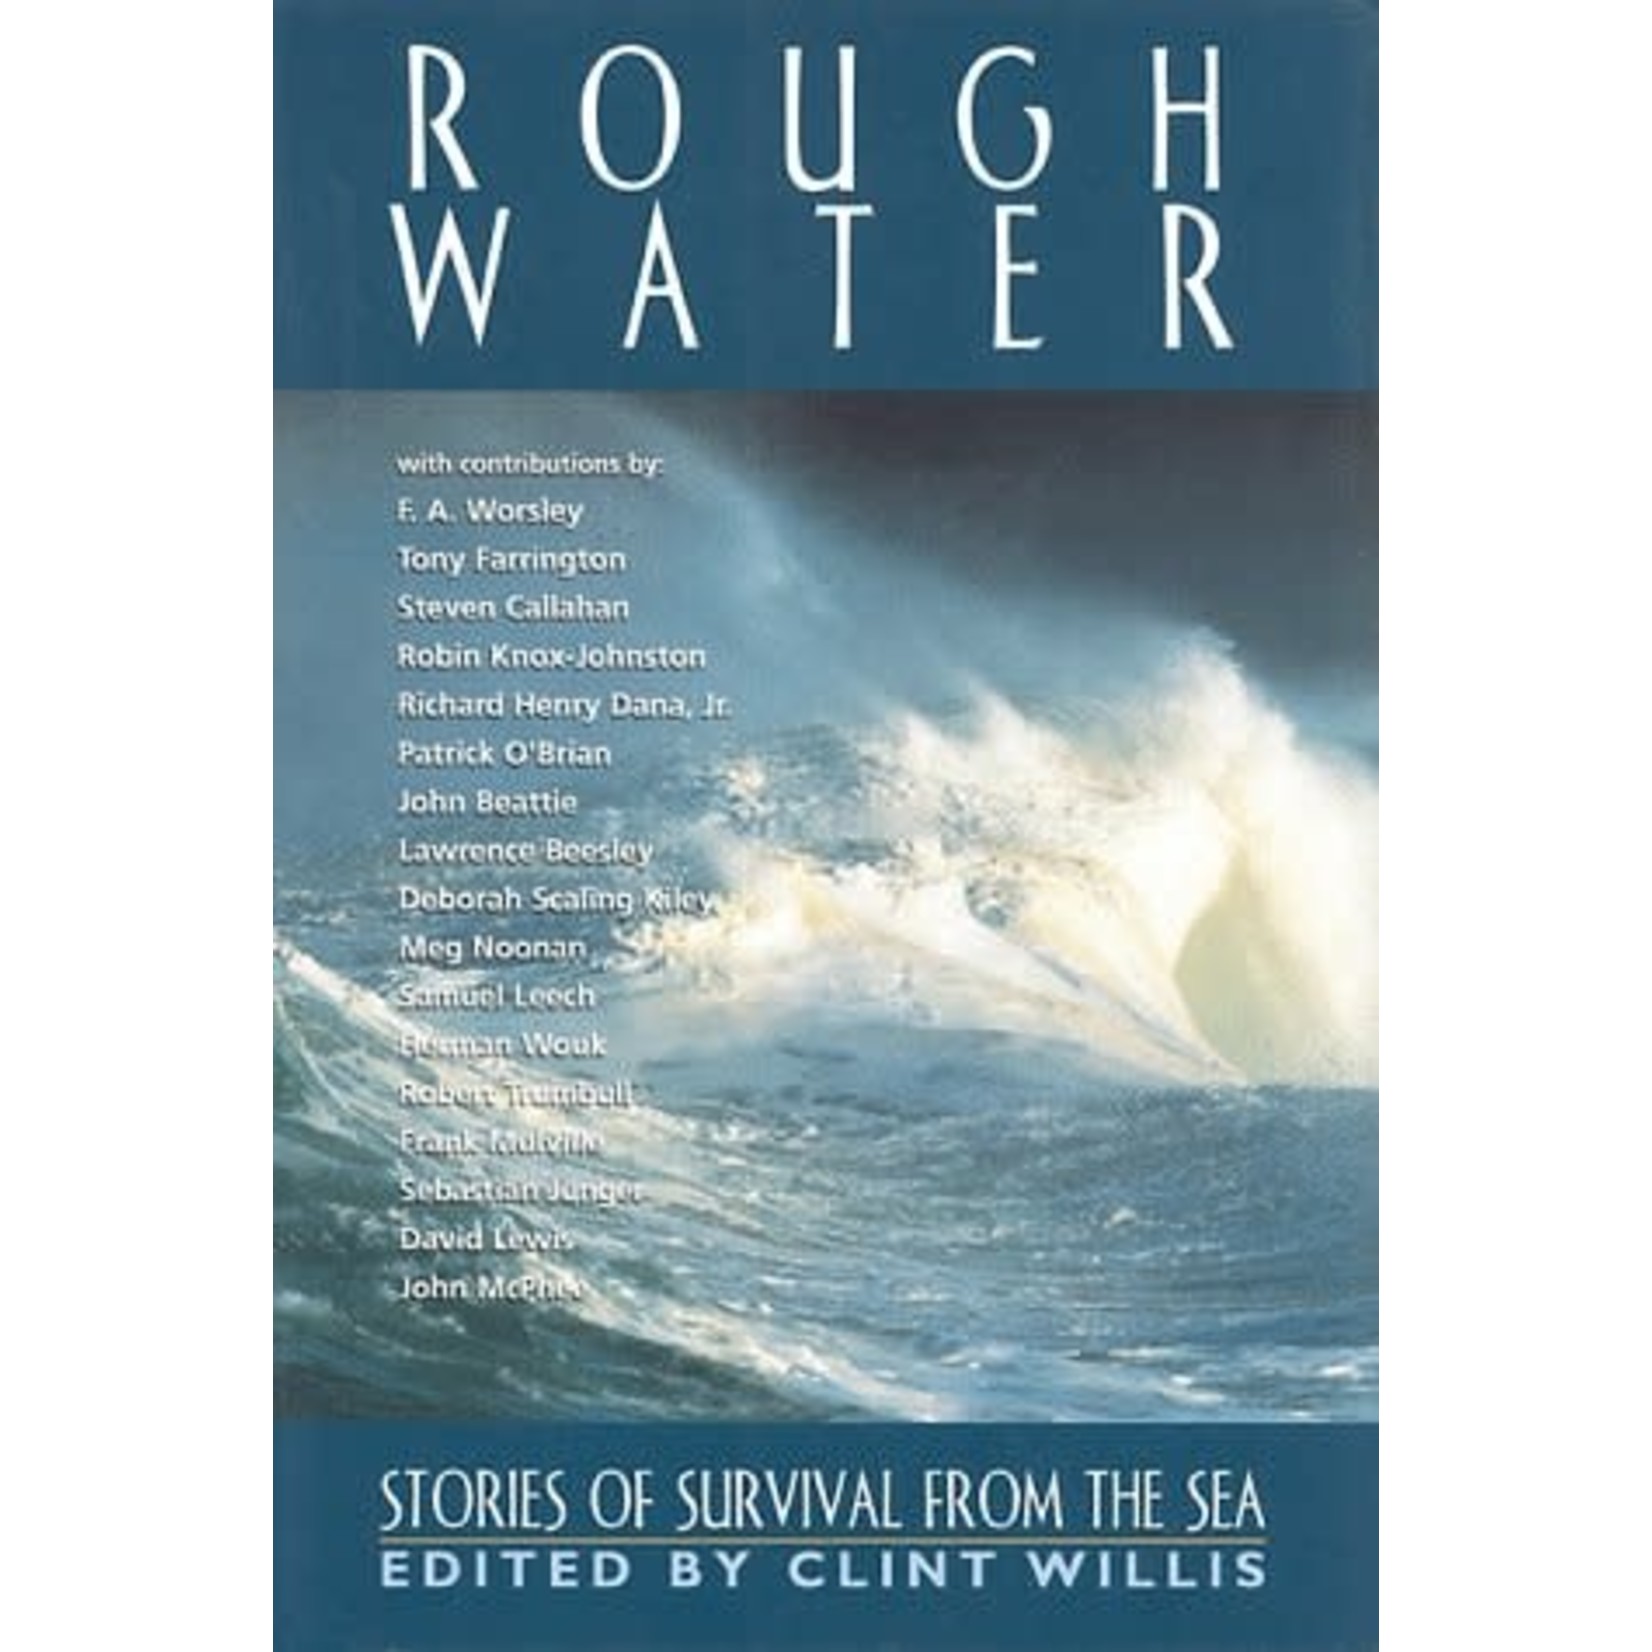 Rough Water - Stories of Survival From the Sea